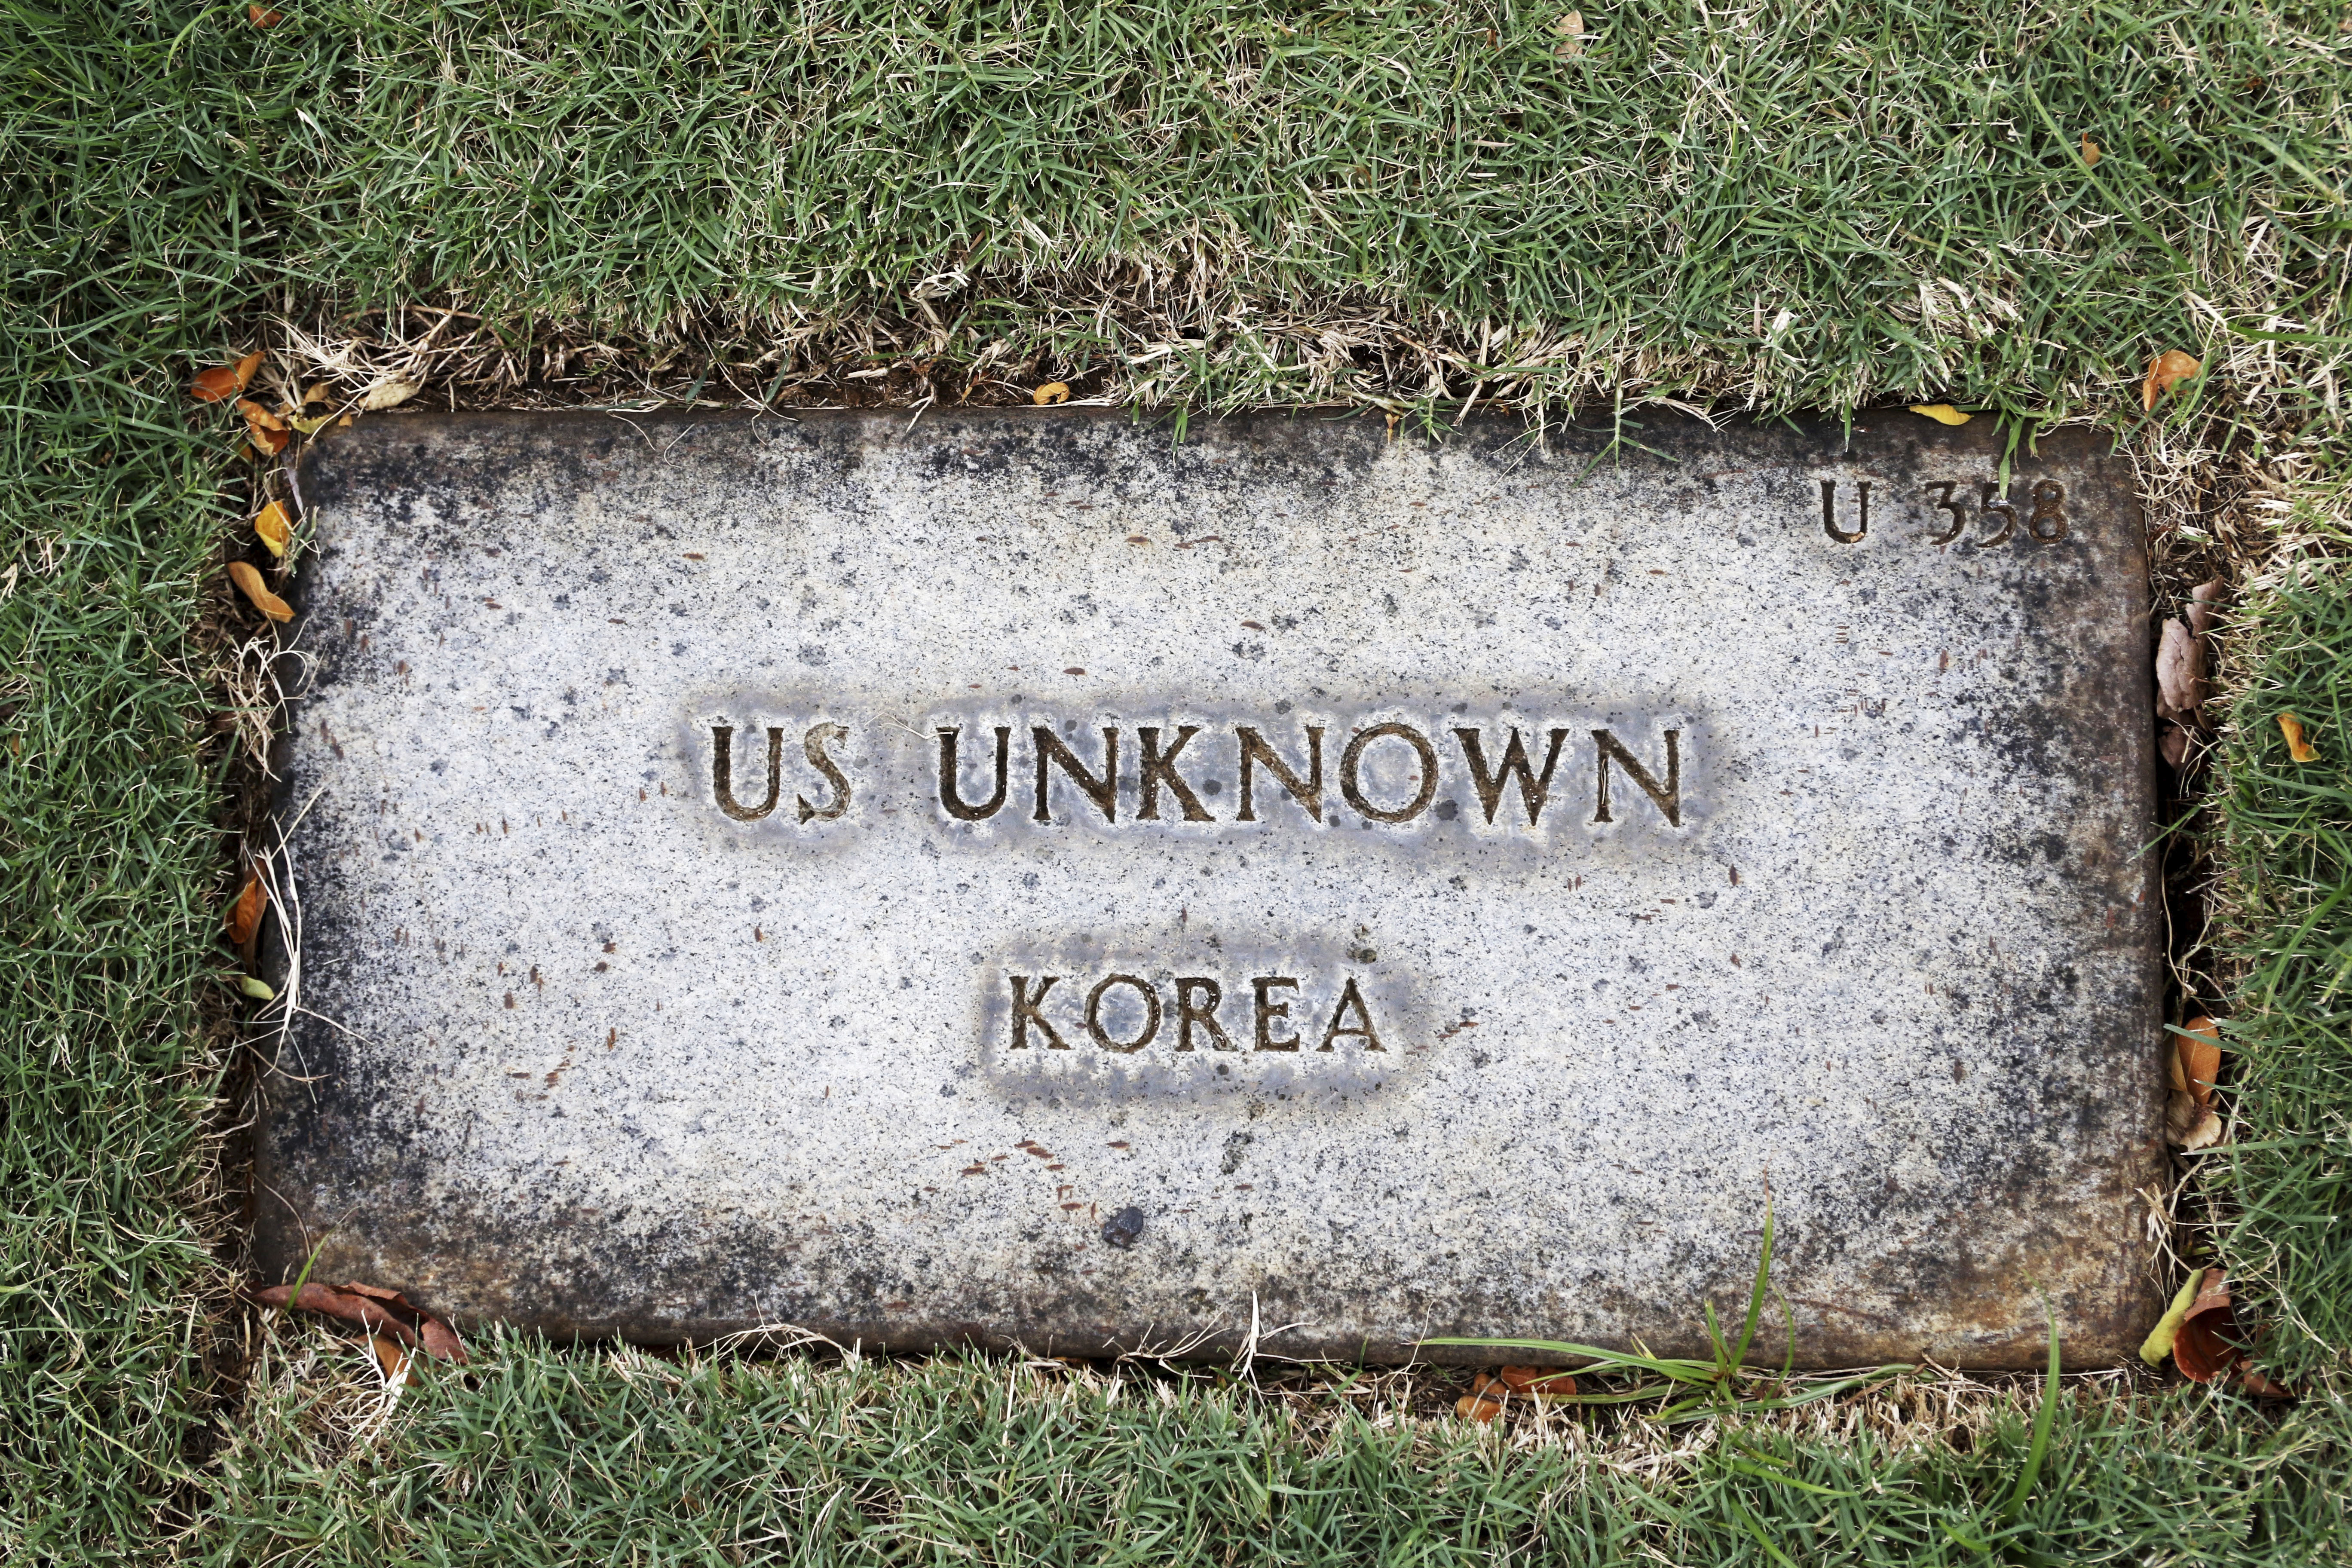 A grave marker for an unknown soldier from the Korean War is shown at the National Memorial Cemetery of the Pacific in Honolulu on Monday, July 30, 2018. Human remains handed over to the U.S. government from North Korea are expected to arrive Wednesday in Honolulu, where scientists will begin the painstaking process of trying to match DNA from the bones to those of American soldiers who didn't return from the Korean War more than a half century ago.